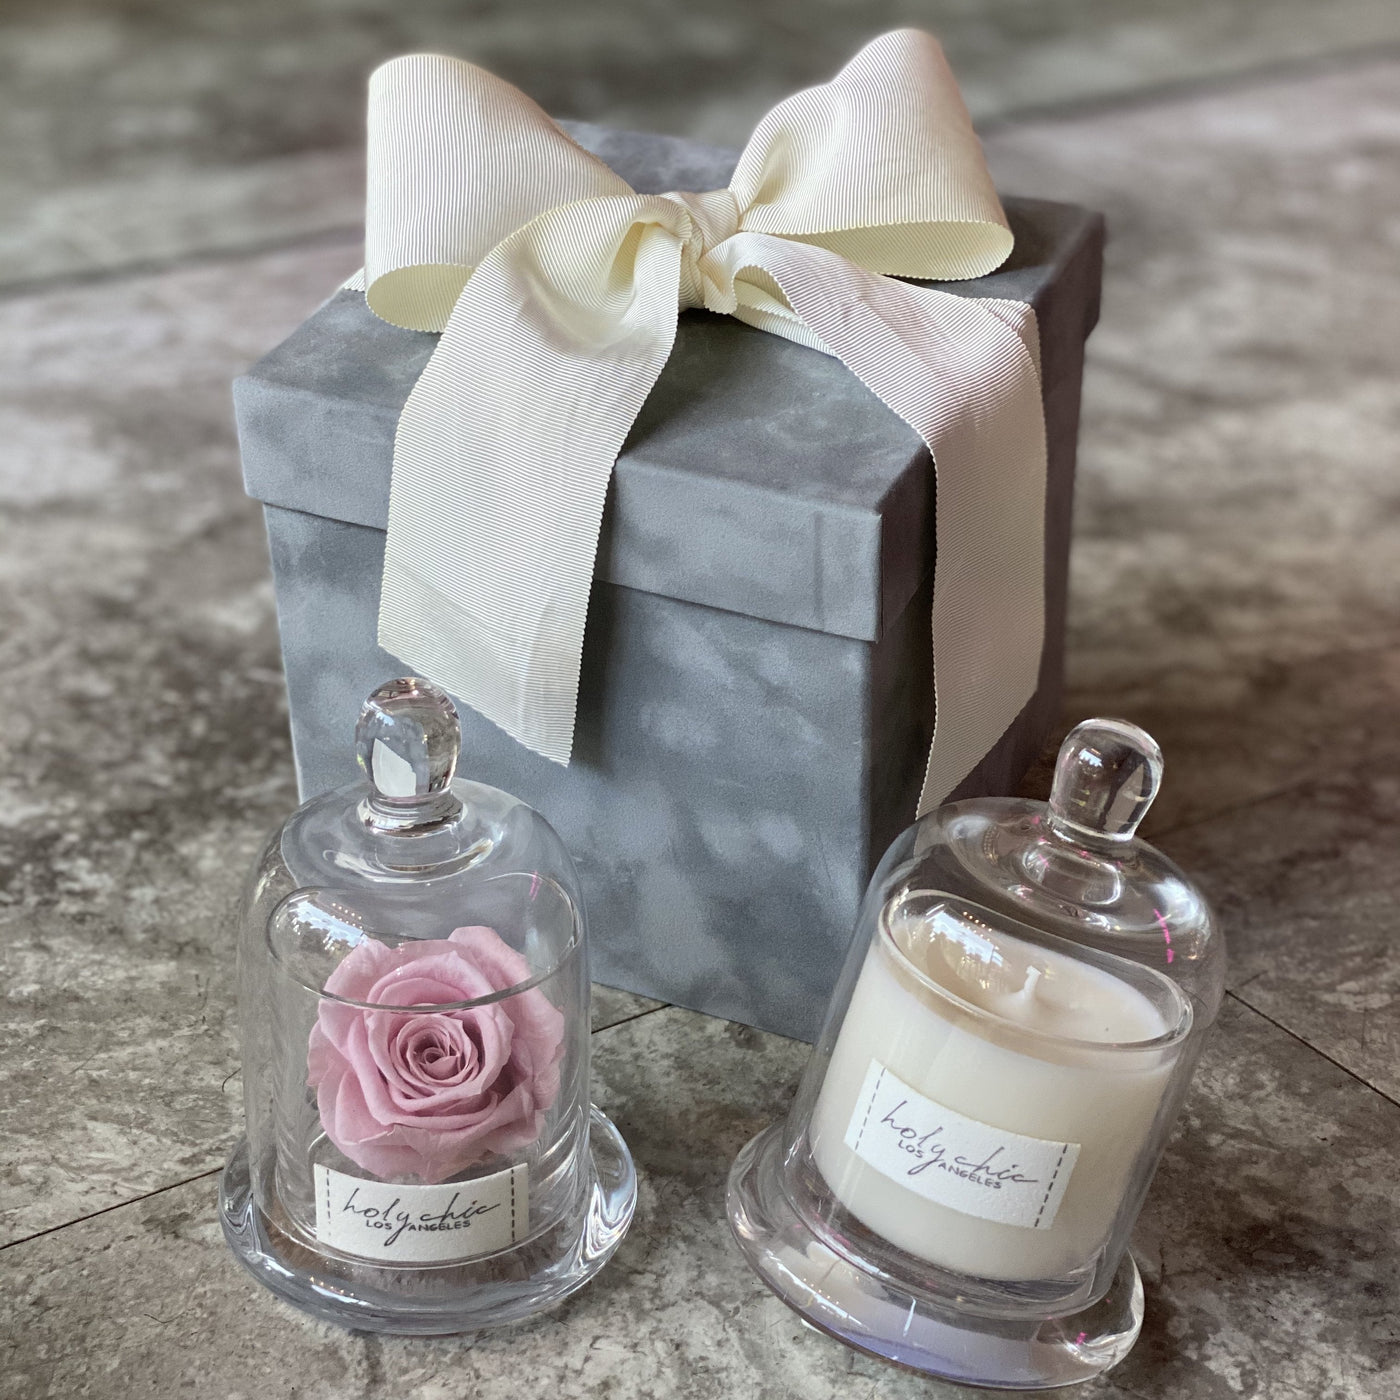 Forever rose and a scented candle in a velvet hat box